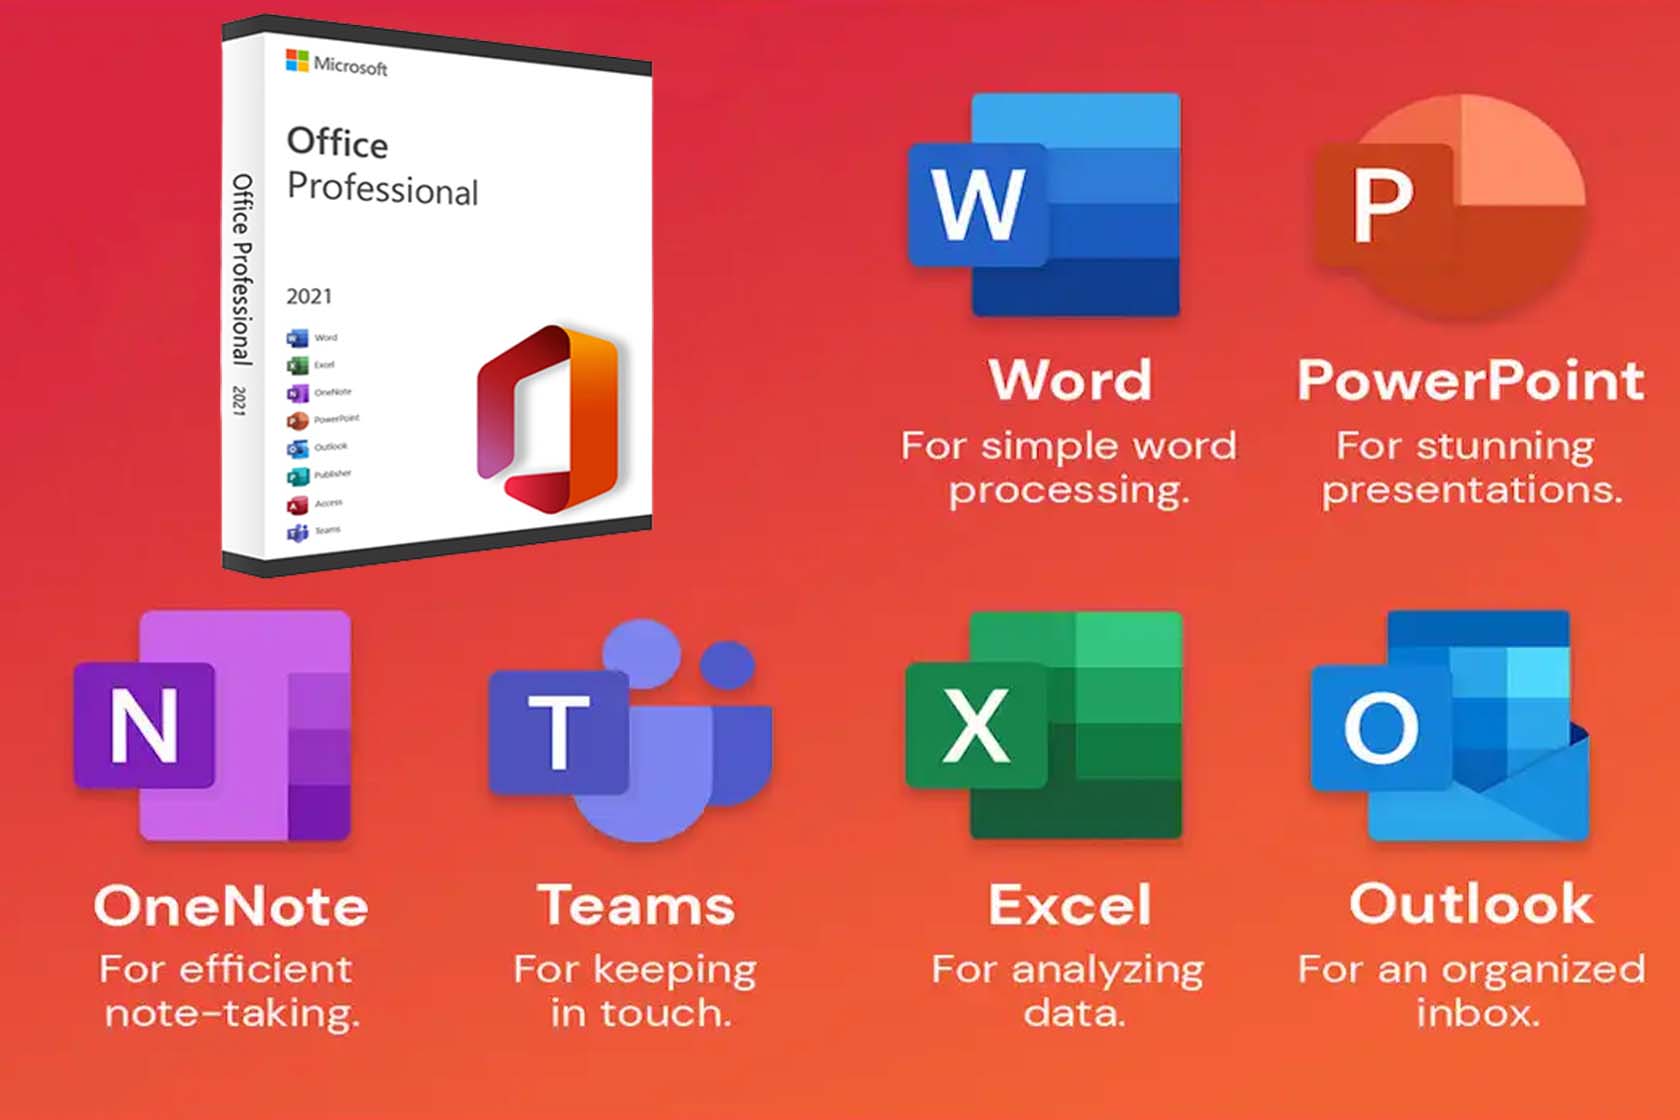  Microsoft Office suite productivity tools including Word, PowerPoint, OneNote, Teams, Excel, and Outlook.